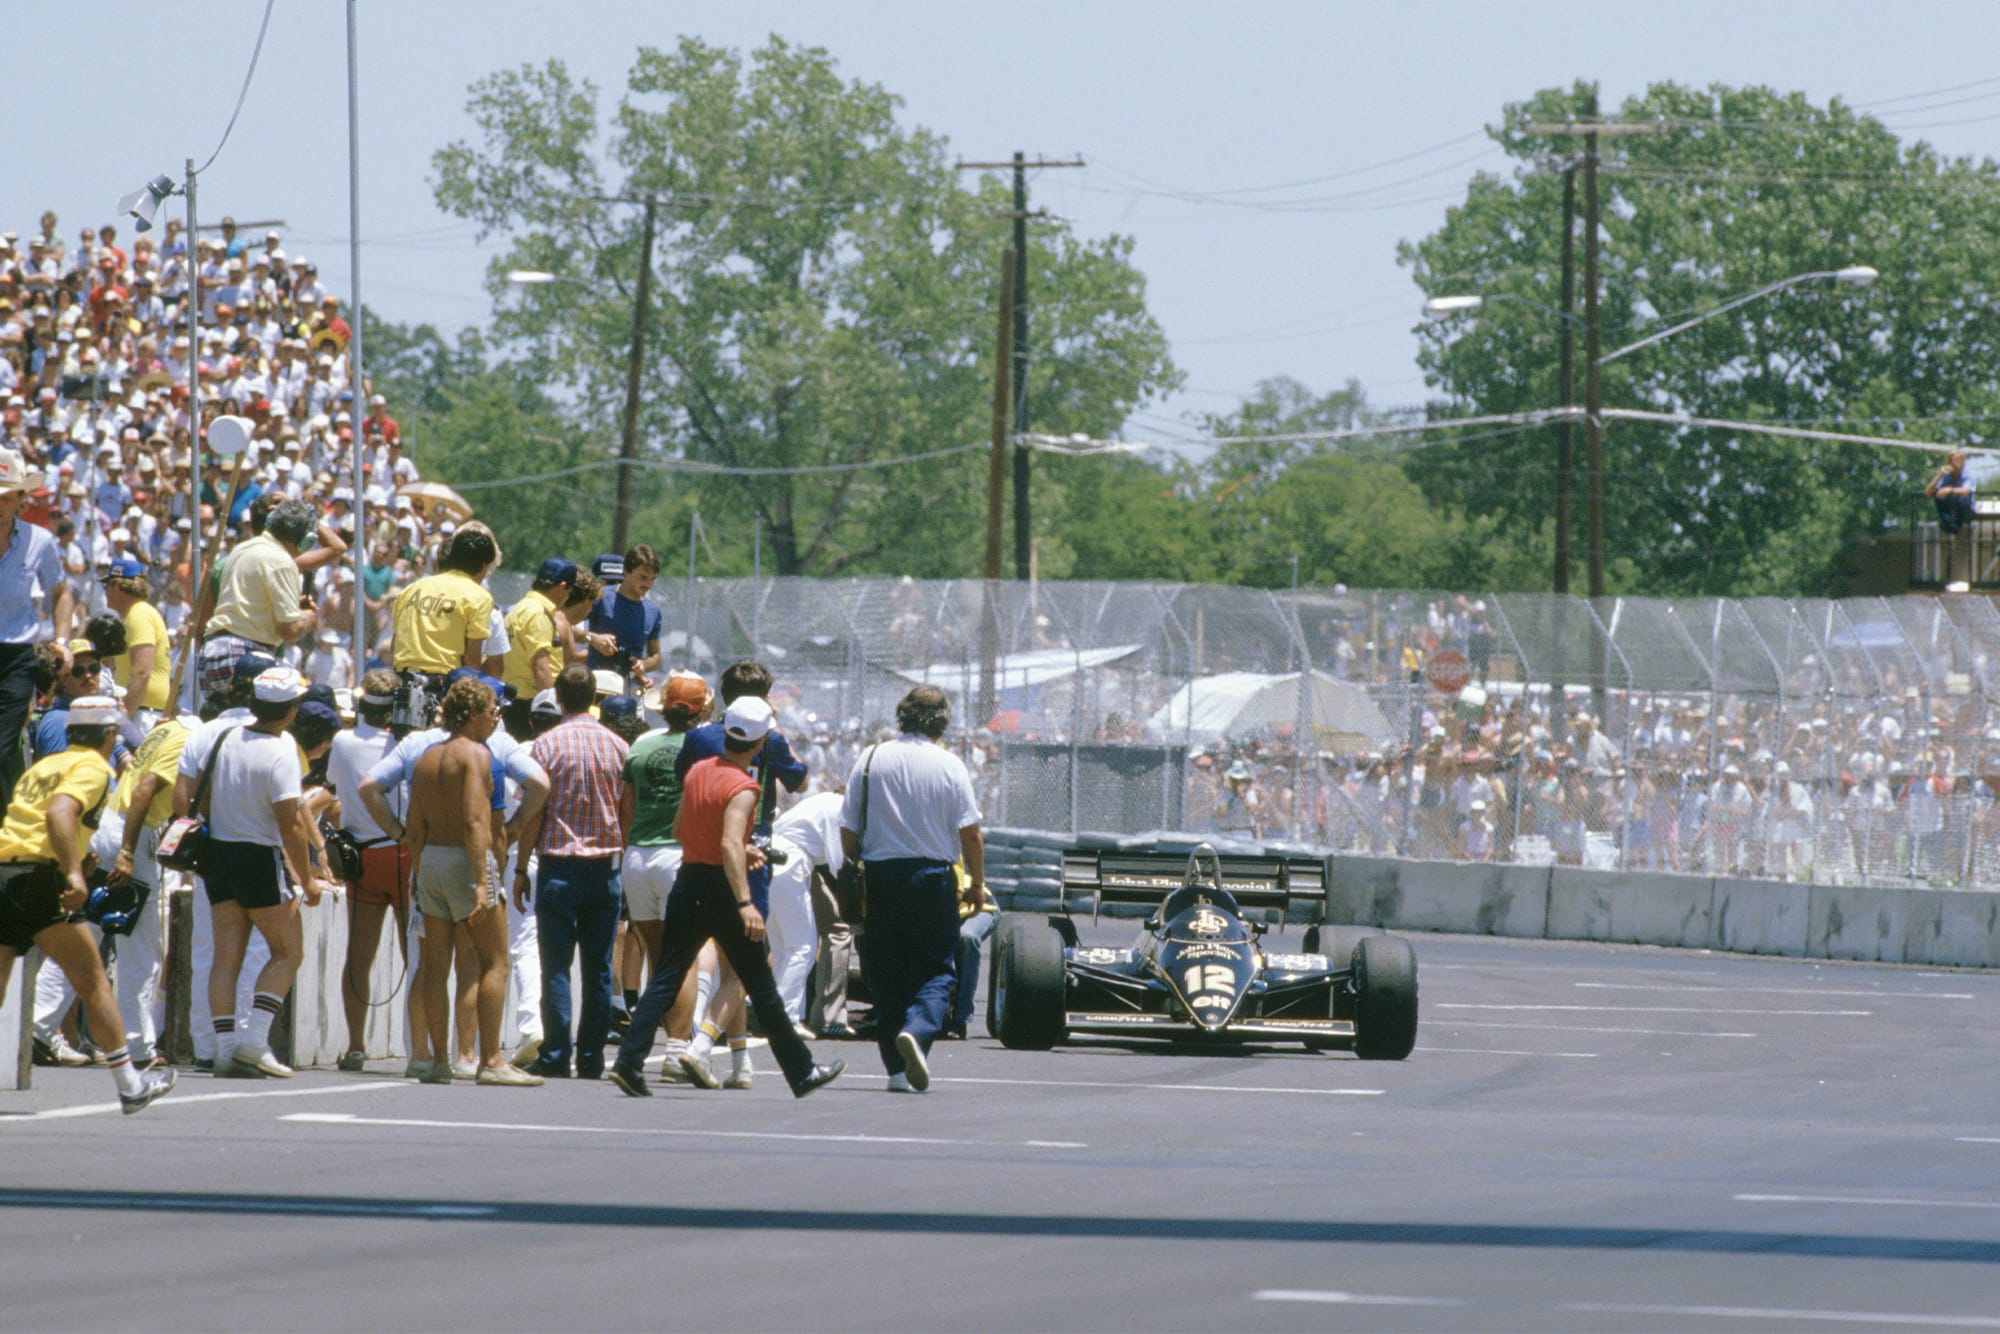 Nigel Mansell collapses trying to push his Lotus across the line at the 1984 Dallas Grand Prix